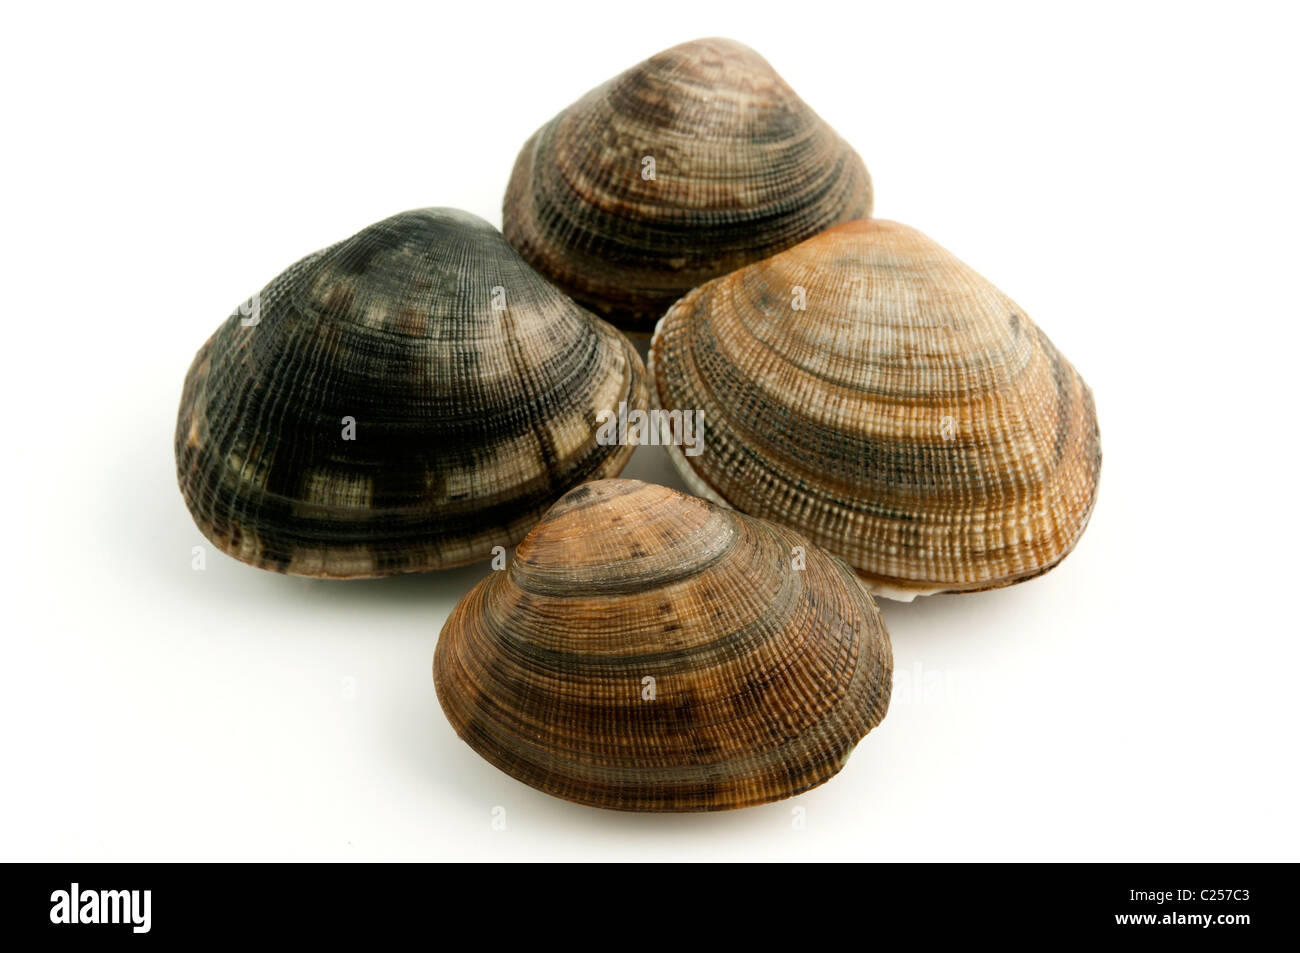 Saltwater clams on a white background Stock Photo